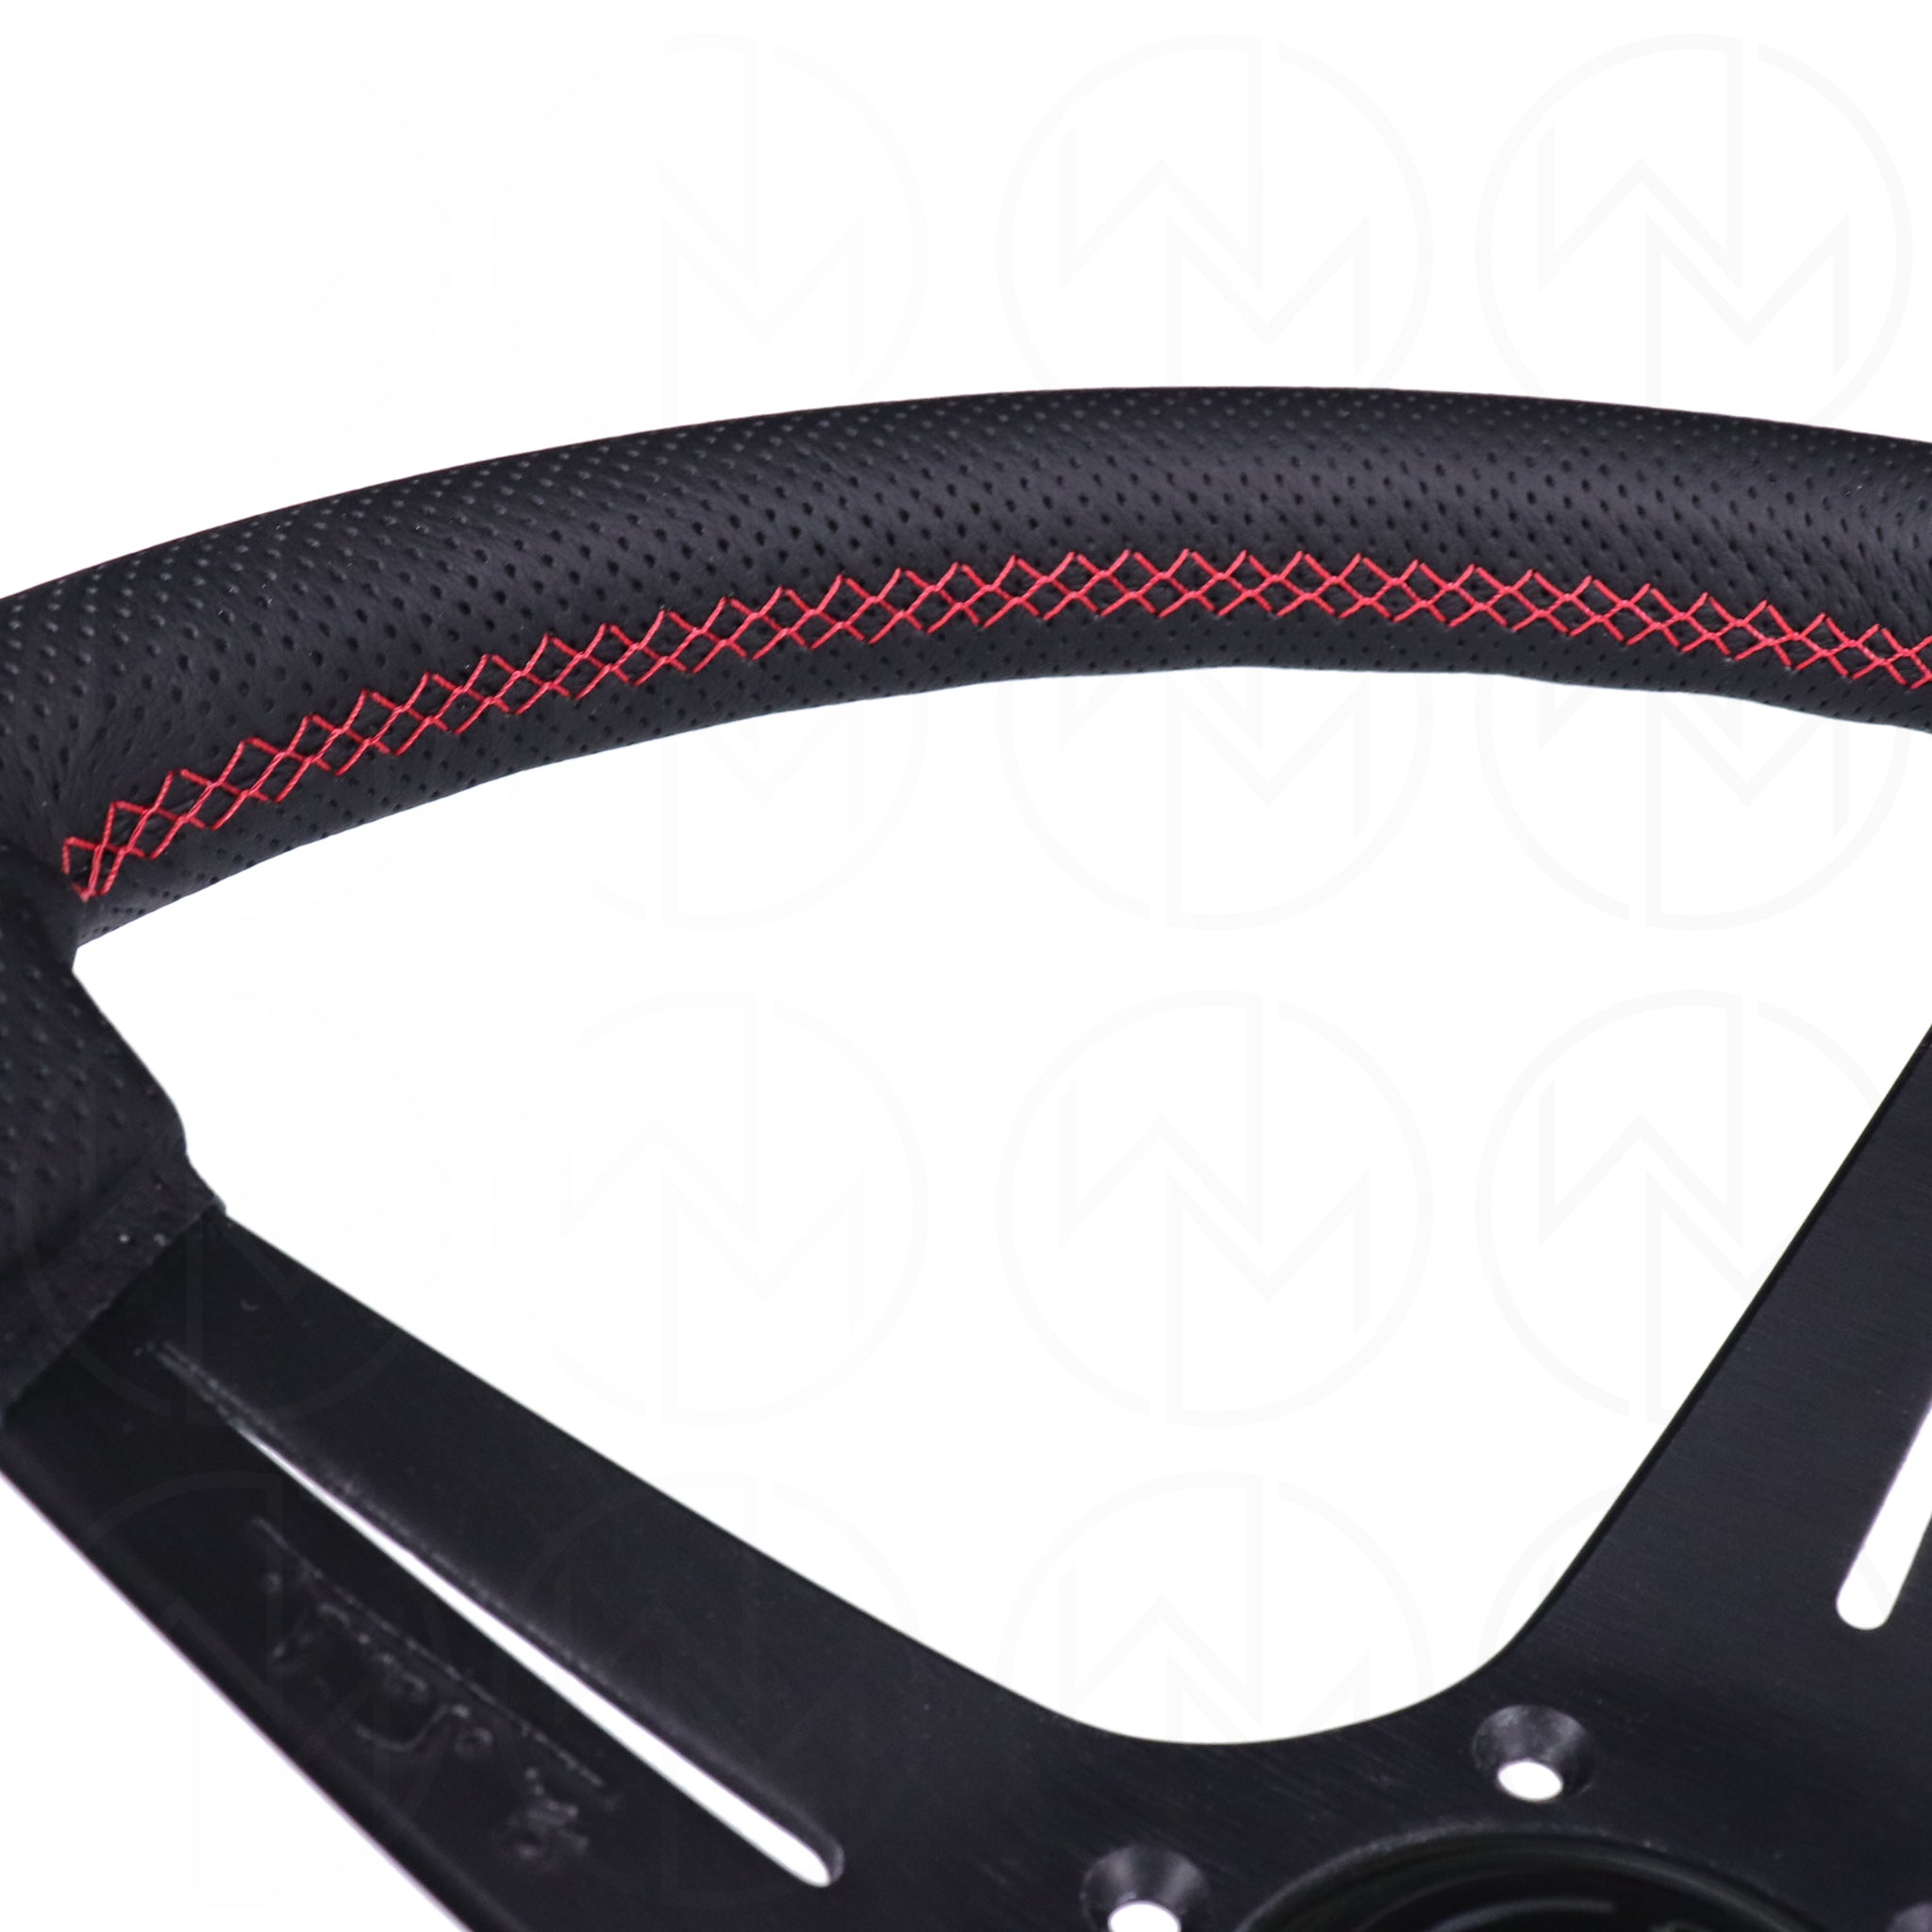 Nardi Sport Rally Deep Corn Sectors Steering Wheel - 350mm Perforated Leather and Colored Sectors